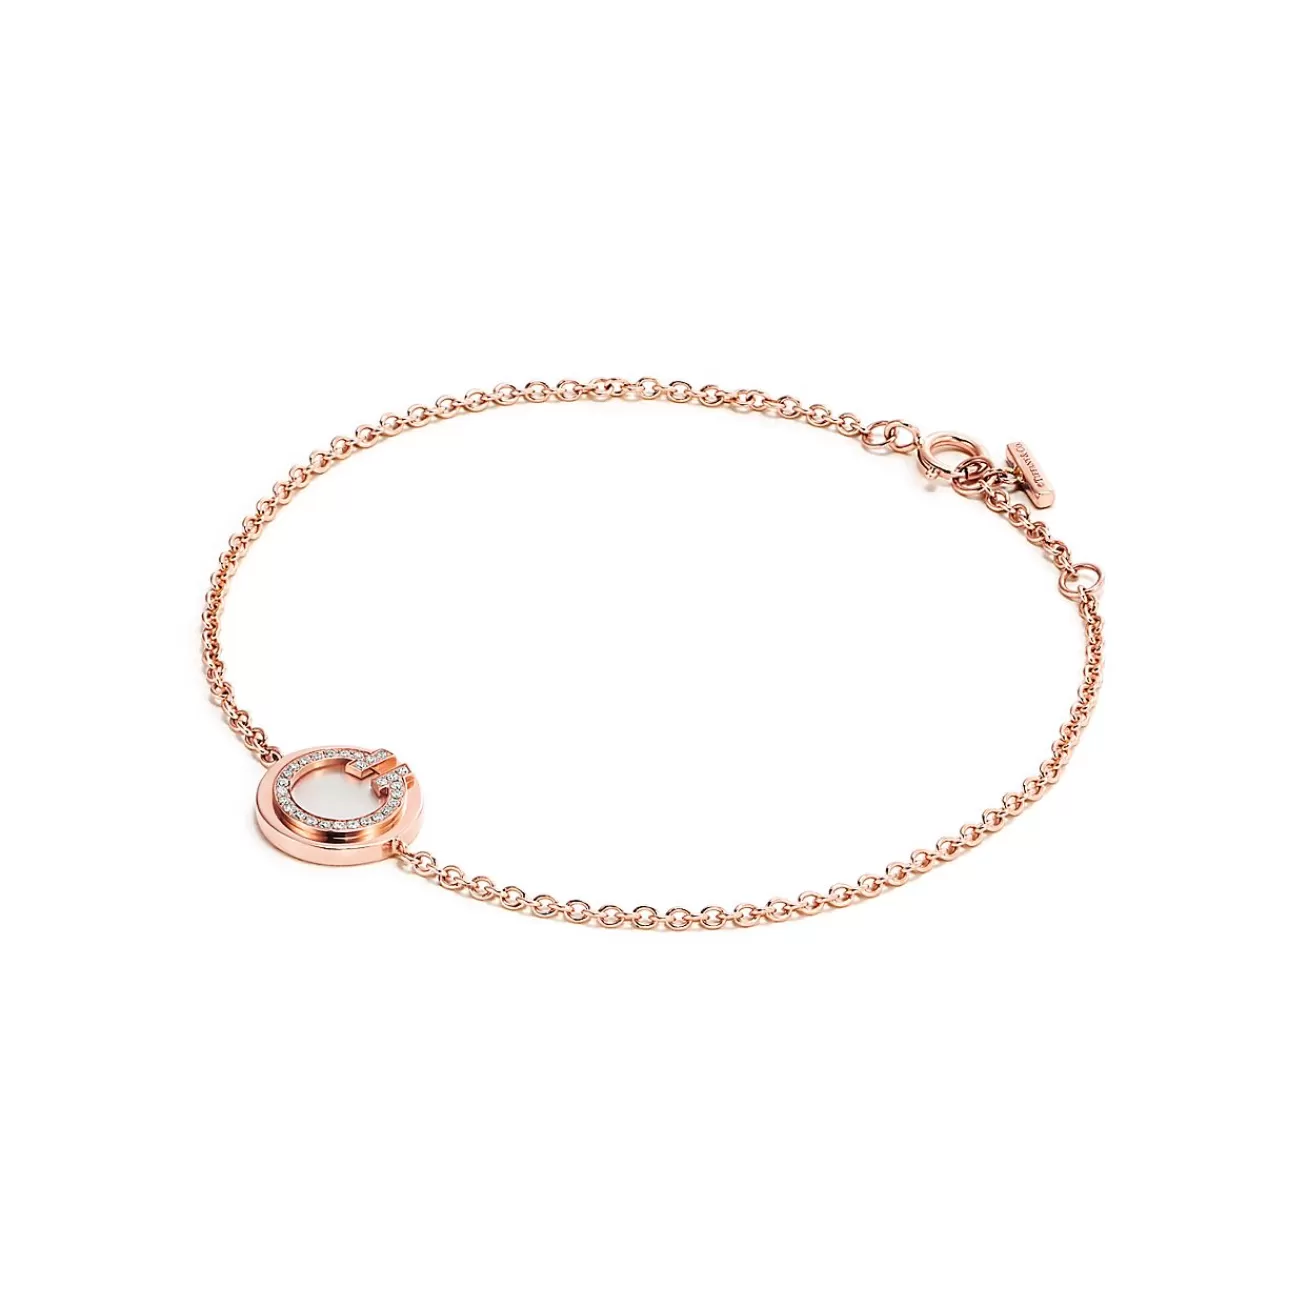 Tiffany & Co. Tiffany T diamond and mother-of-pearl circle bracelet in 18k rose gold. | ^ Bracelets | Rose Gold Jewelry